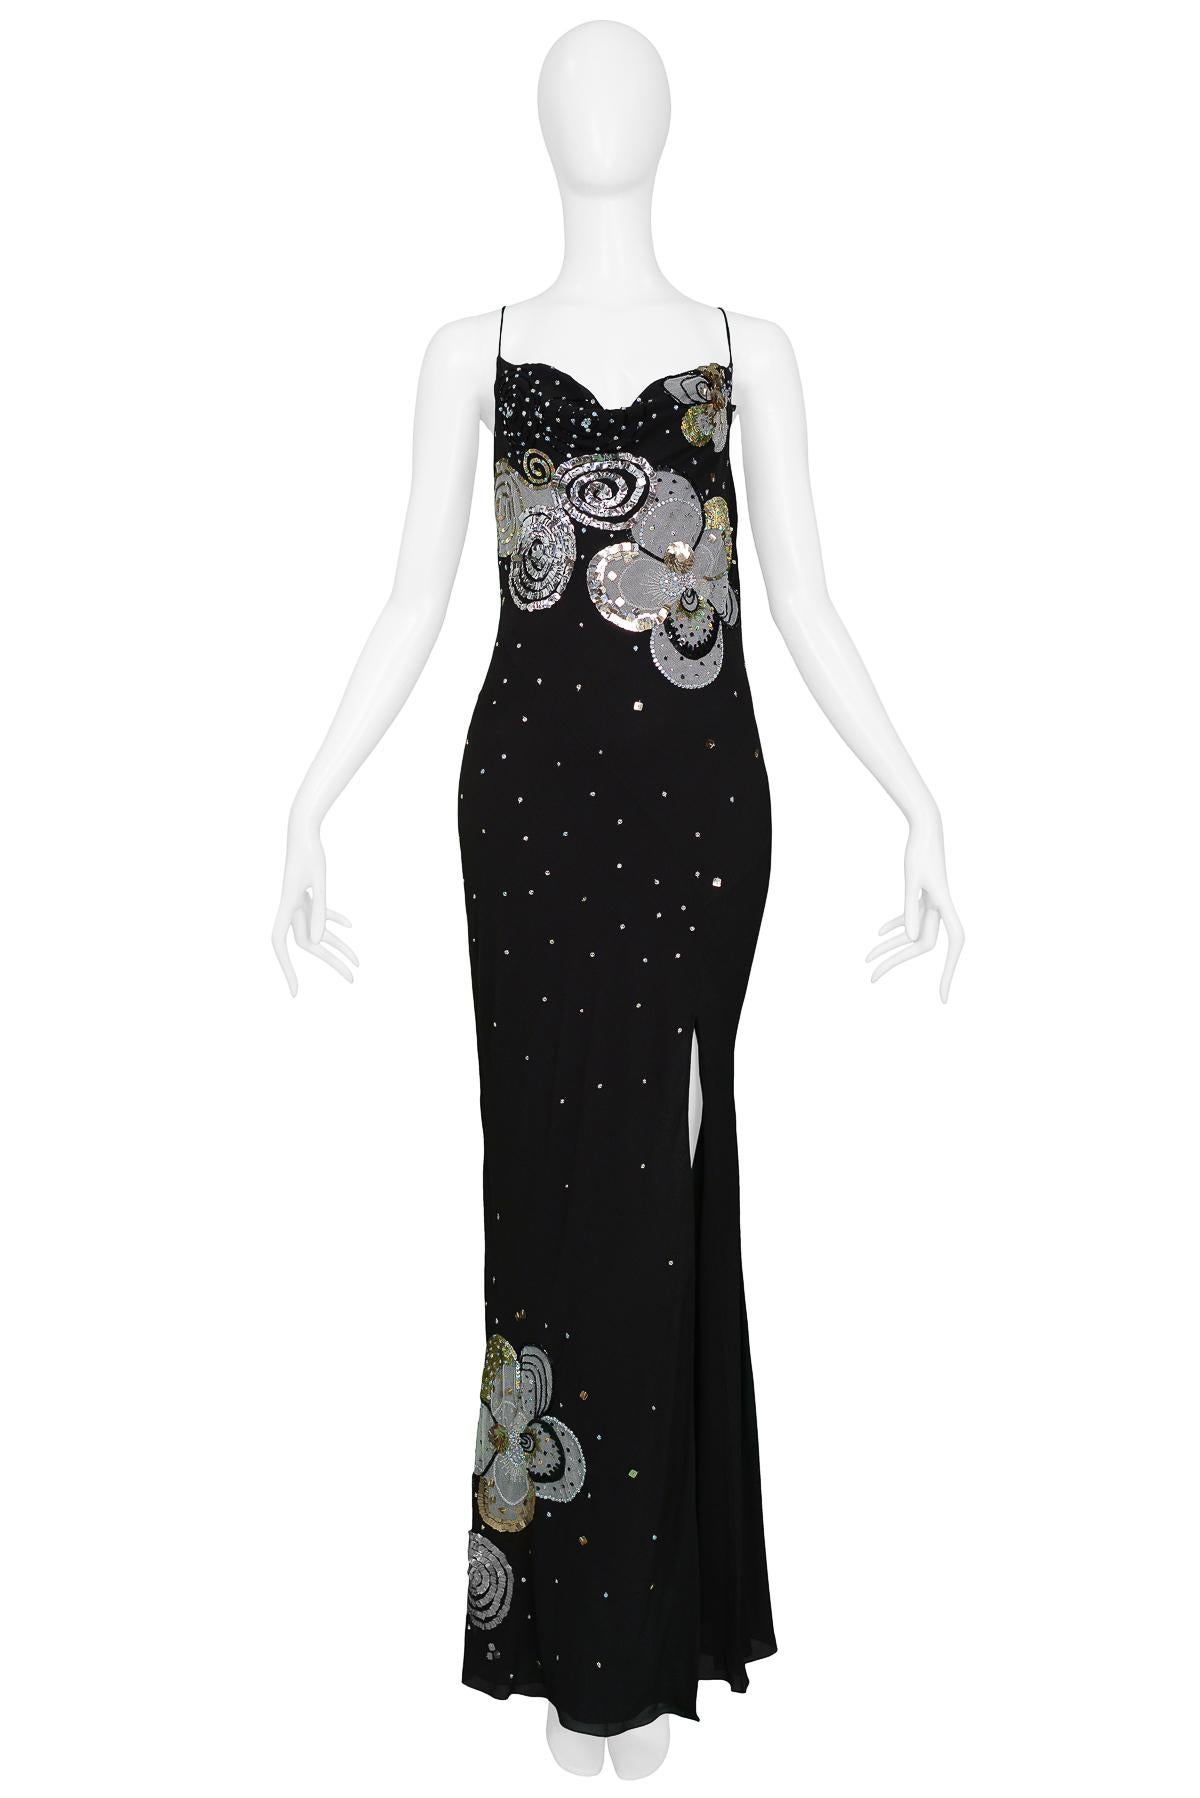 Vintage John Galliano for Christian Dior black silk chiffon bias-cut evening gown. The gown features a cowl neckline and low, draped back, and it’s classic sleek silhouette is embellished with floral mesh appliqué, iridescent sequins, crystals,